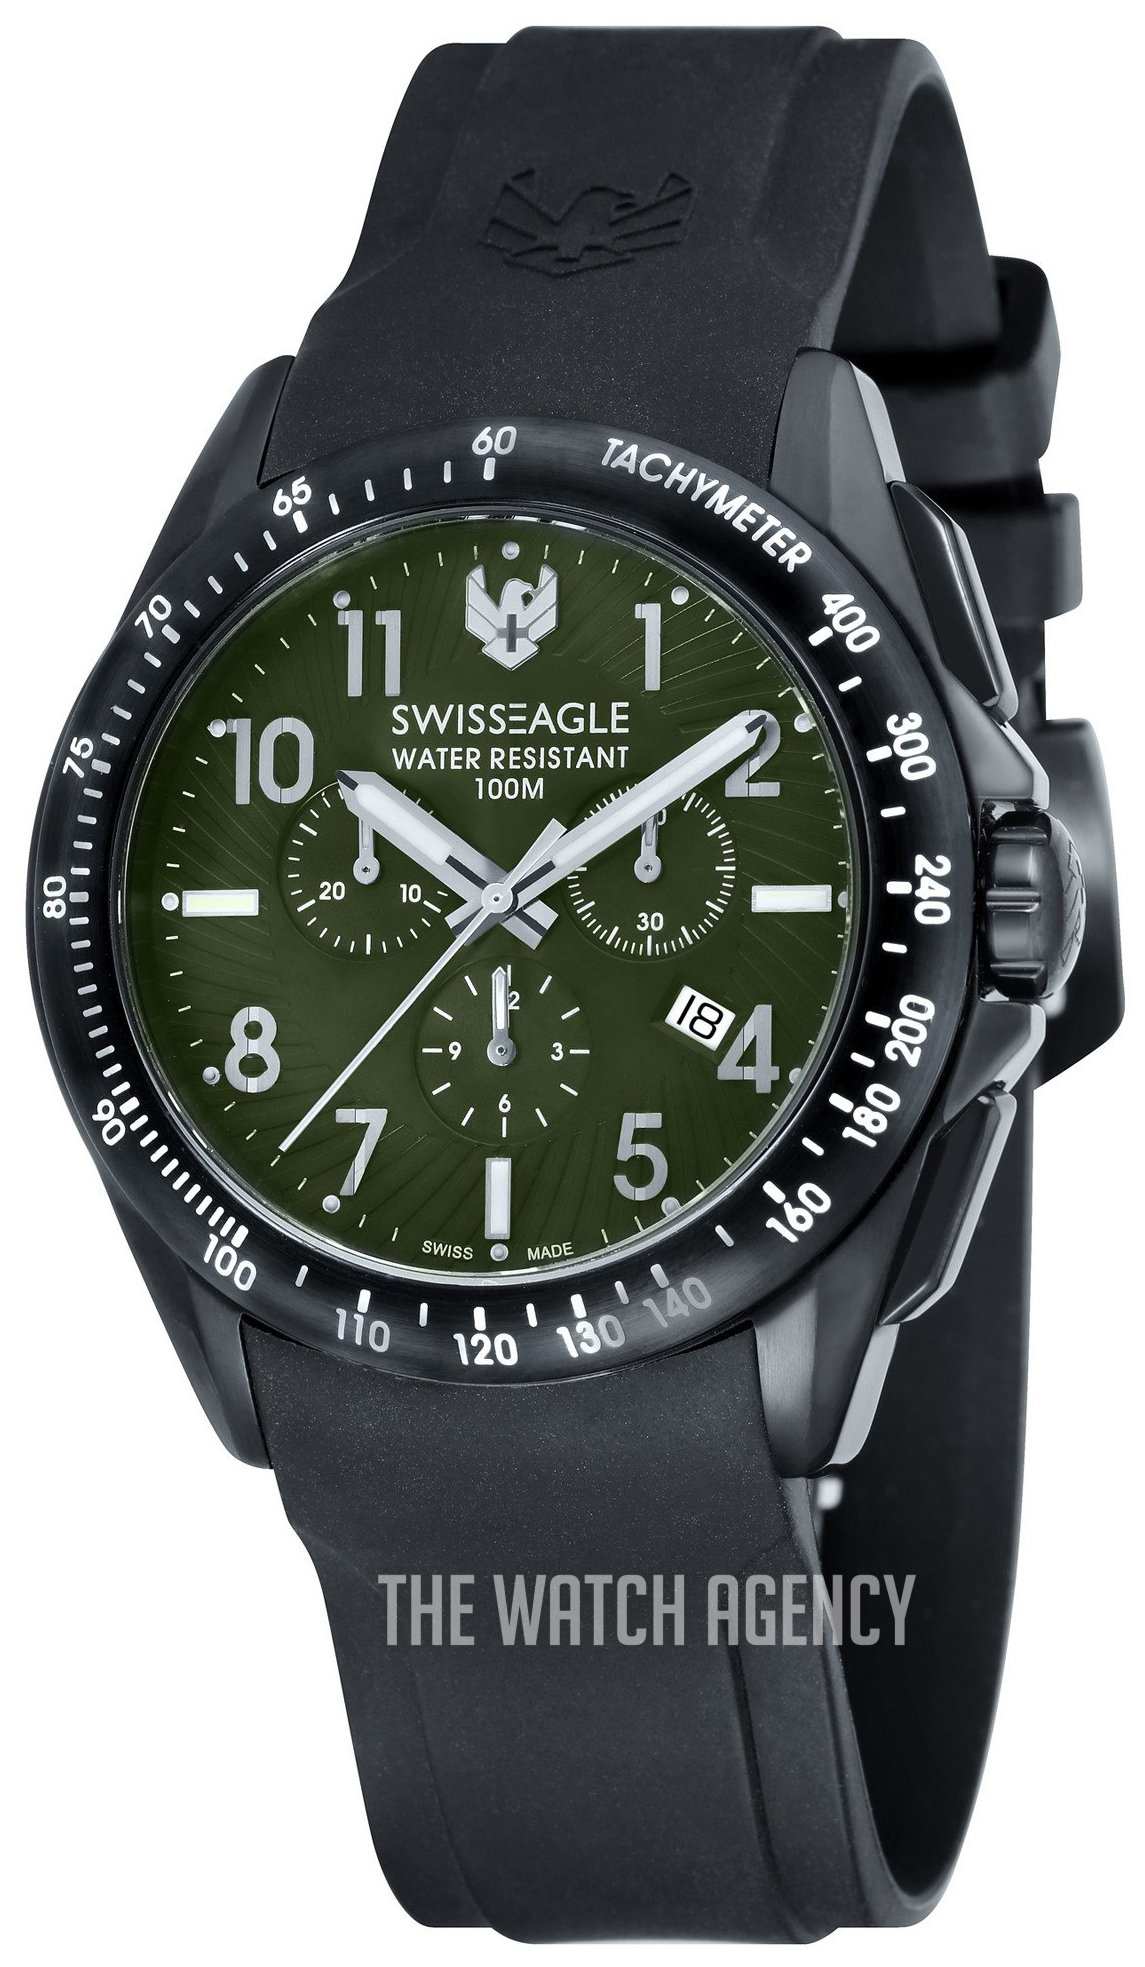 SE-9061-03 Swiss Eagle Tactical | TheWatchAgency™